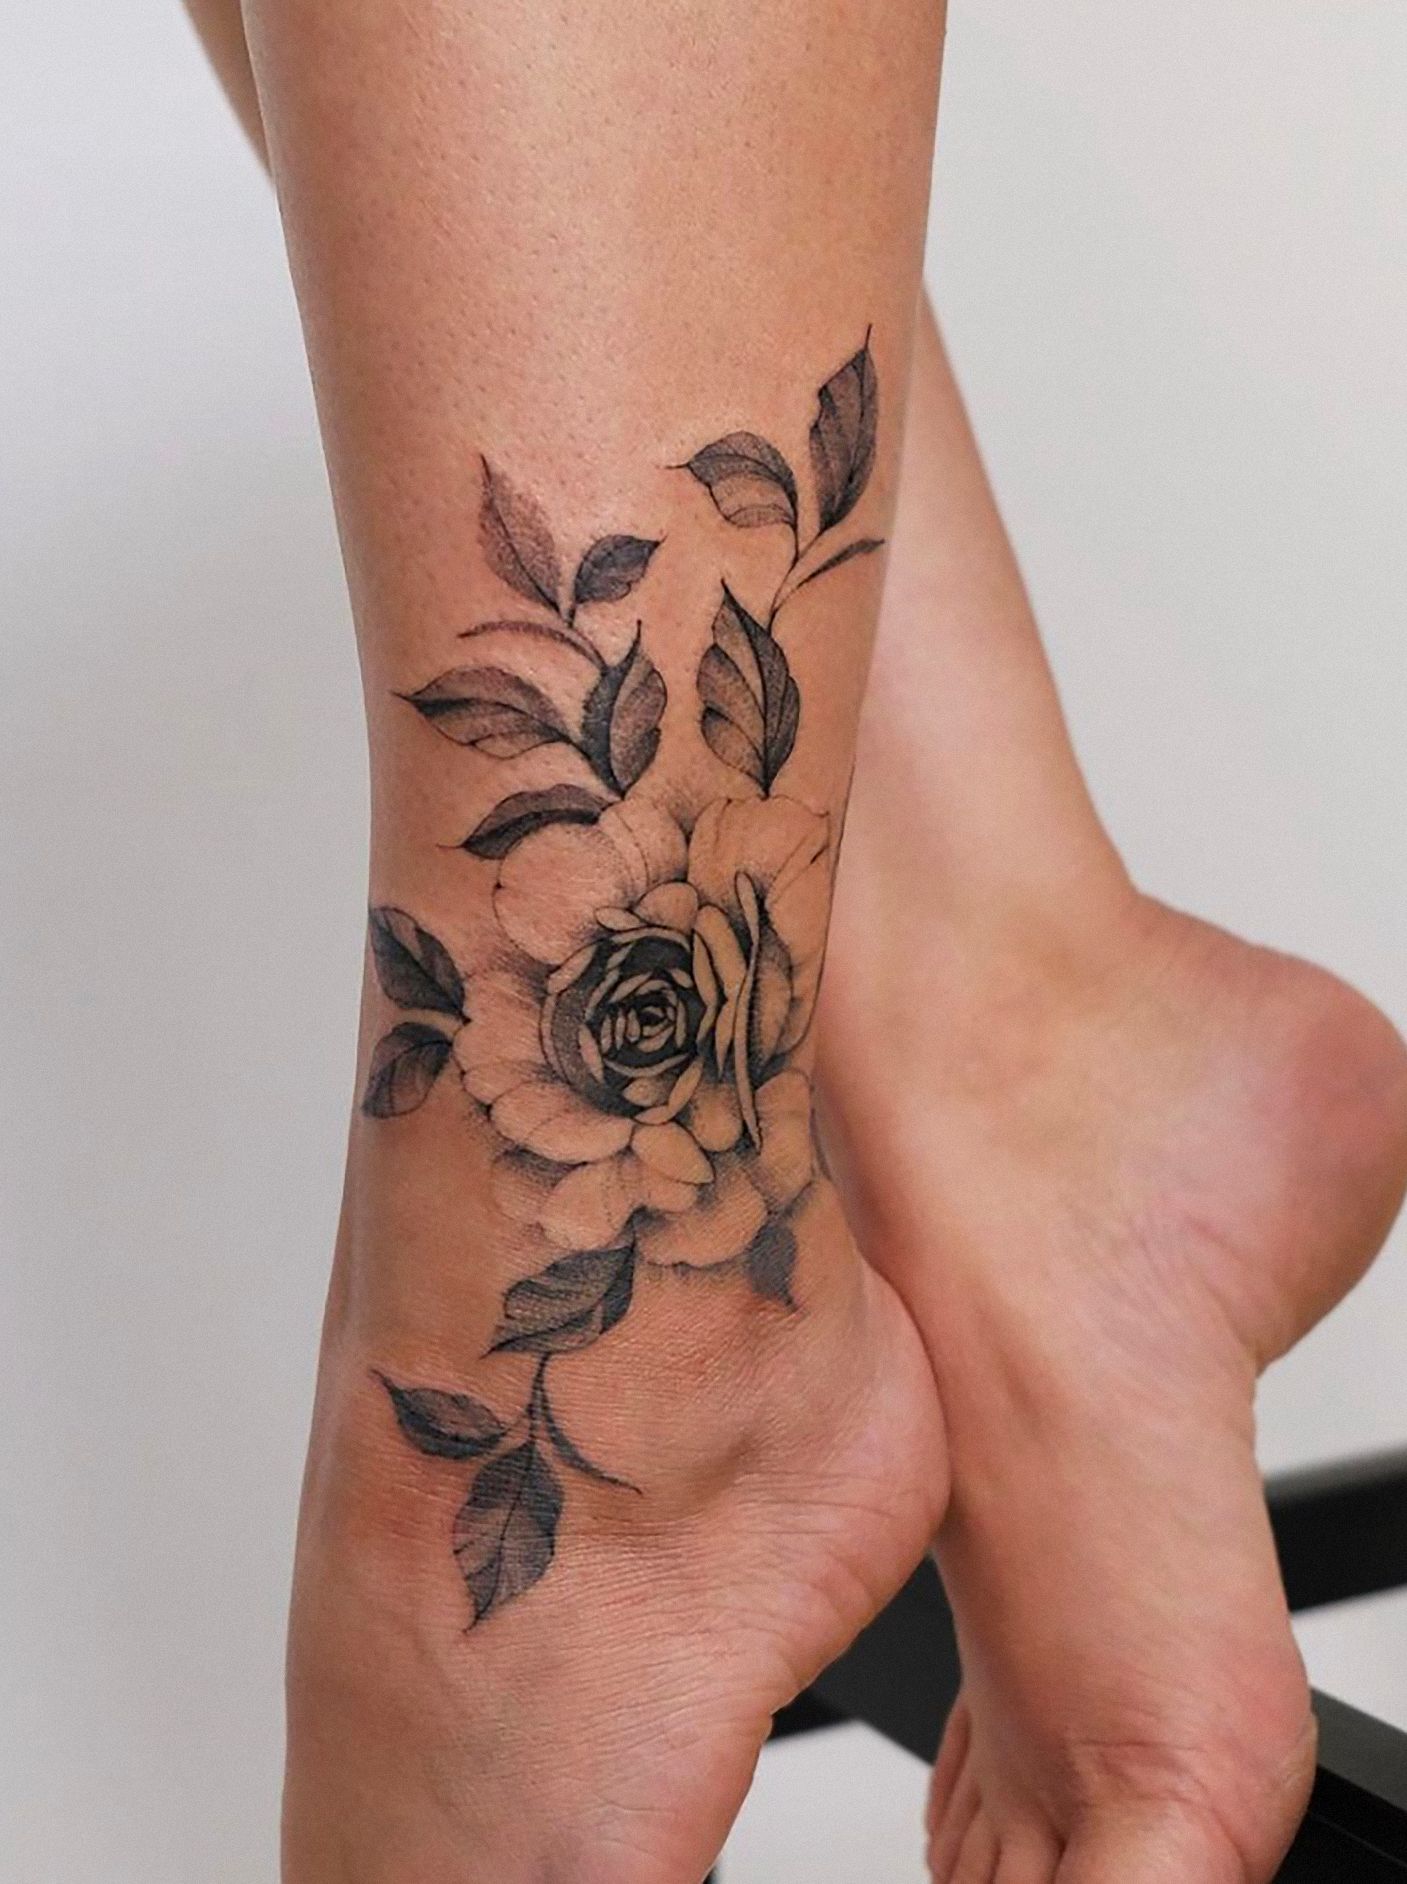 Adorable Small Ankle Tattoos For Women & Their Meaning | Fashionisers© |  Small girl tattoos, Tattoos, Cute tattoos for women